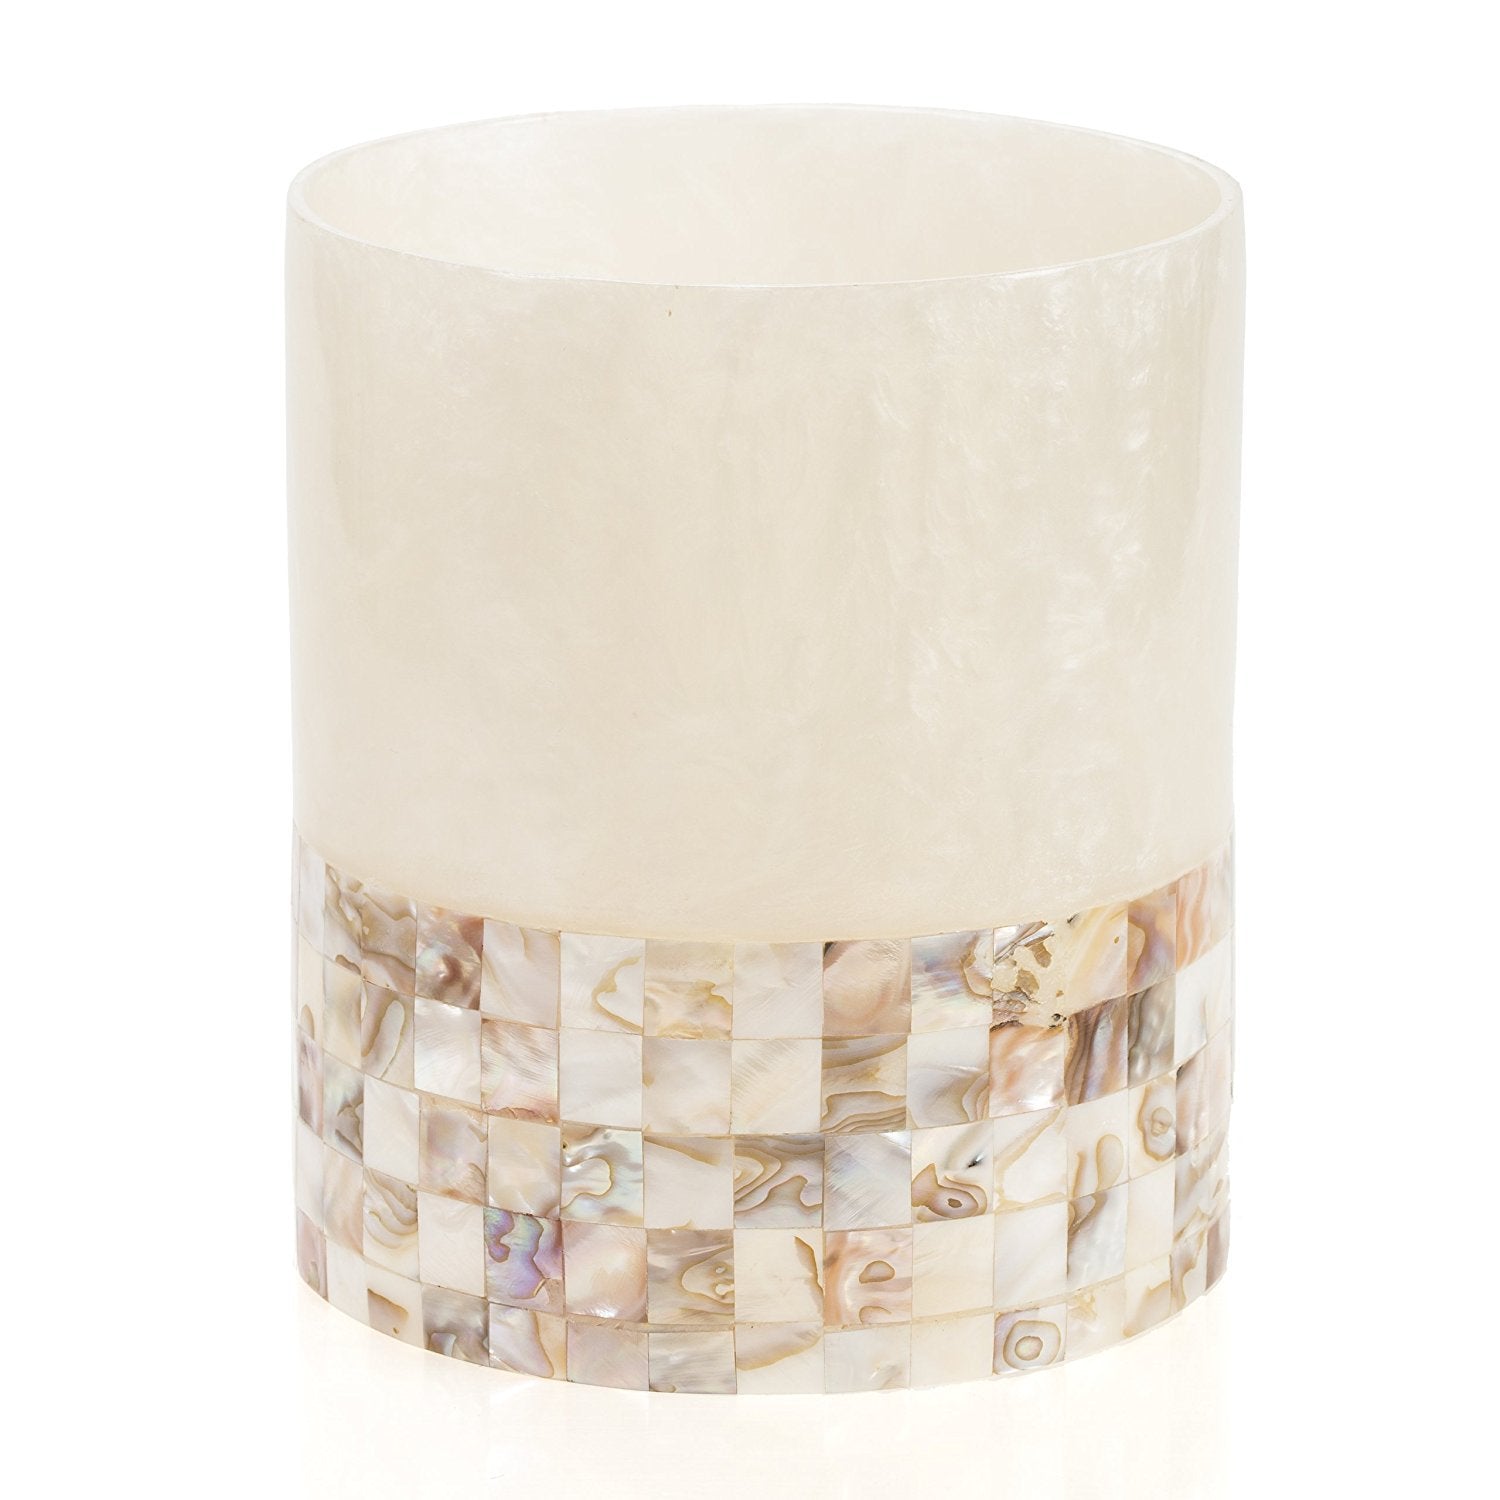 Creative Scents Bathroom Trash Can - Decorative Bathroom Wastebasket Finished in Beautiful Mother of Pearl - Modern Round Waste Basket for Bathroom, Powder Room Or Living Room (Milano Collection)  - Like New